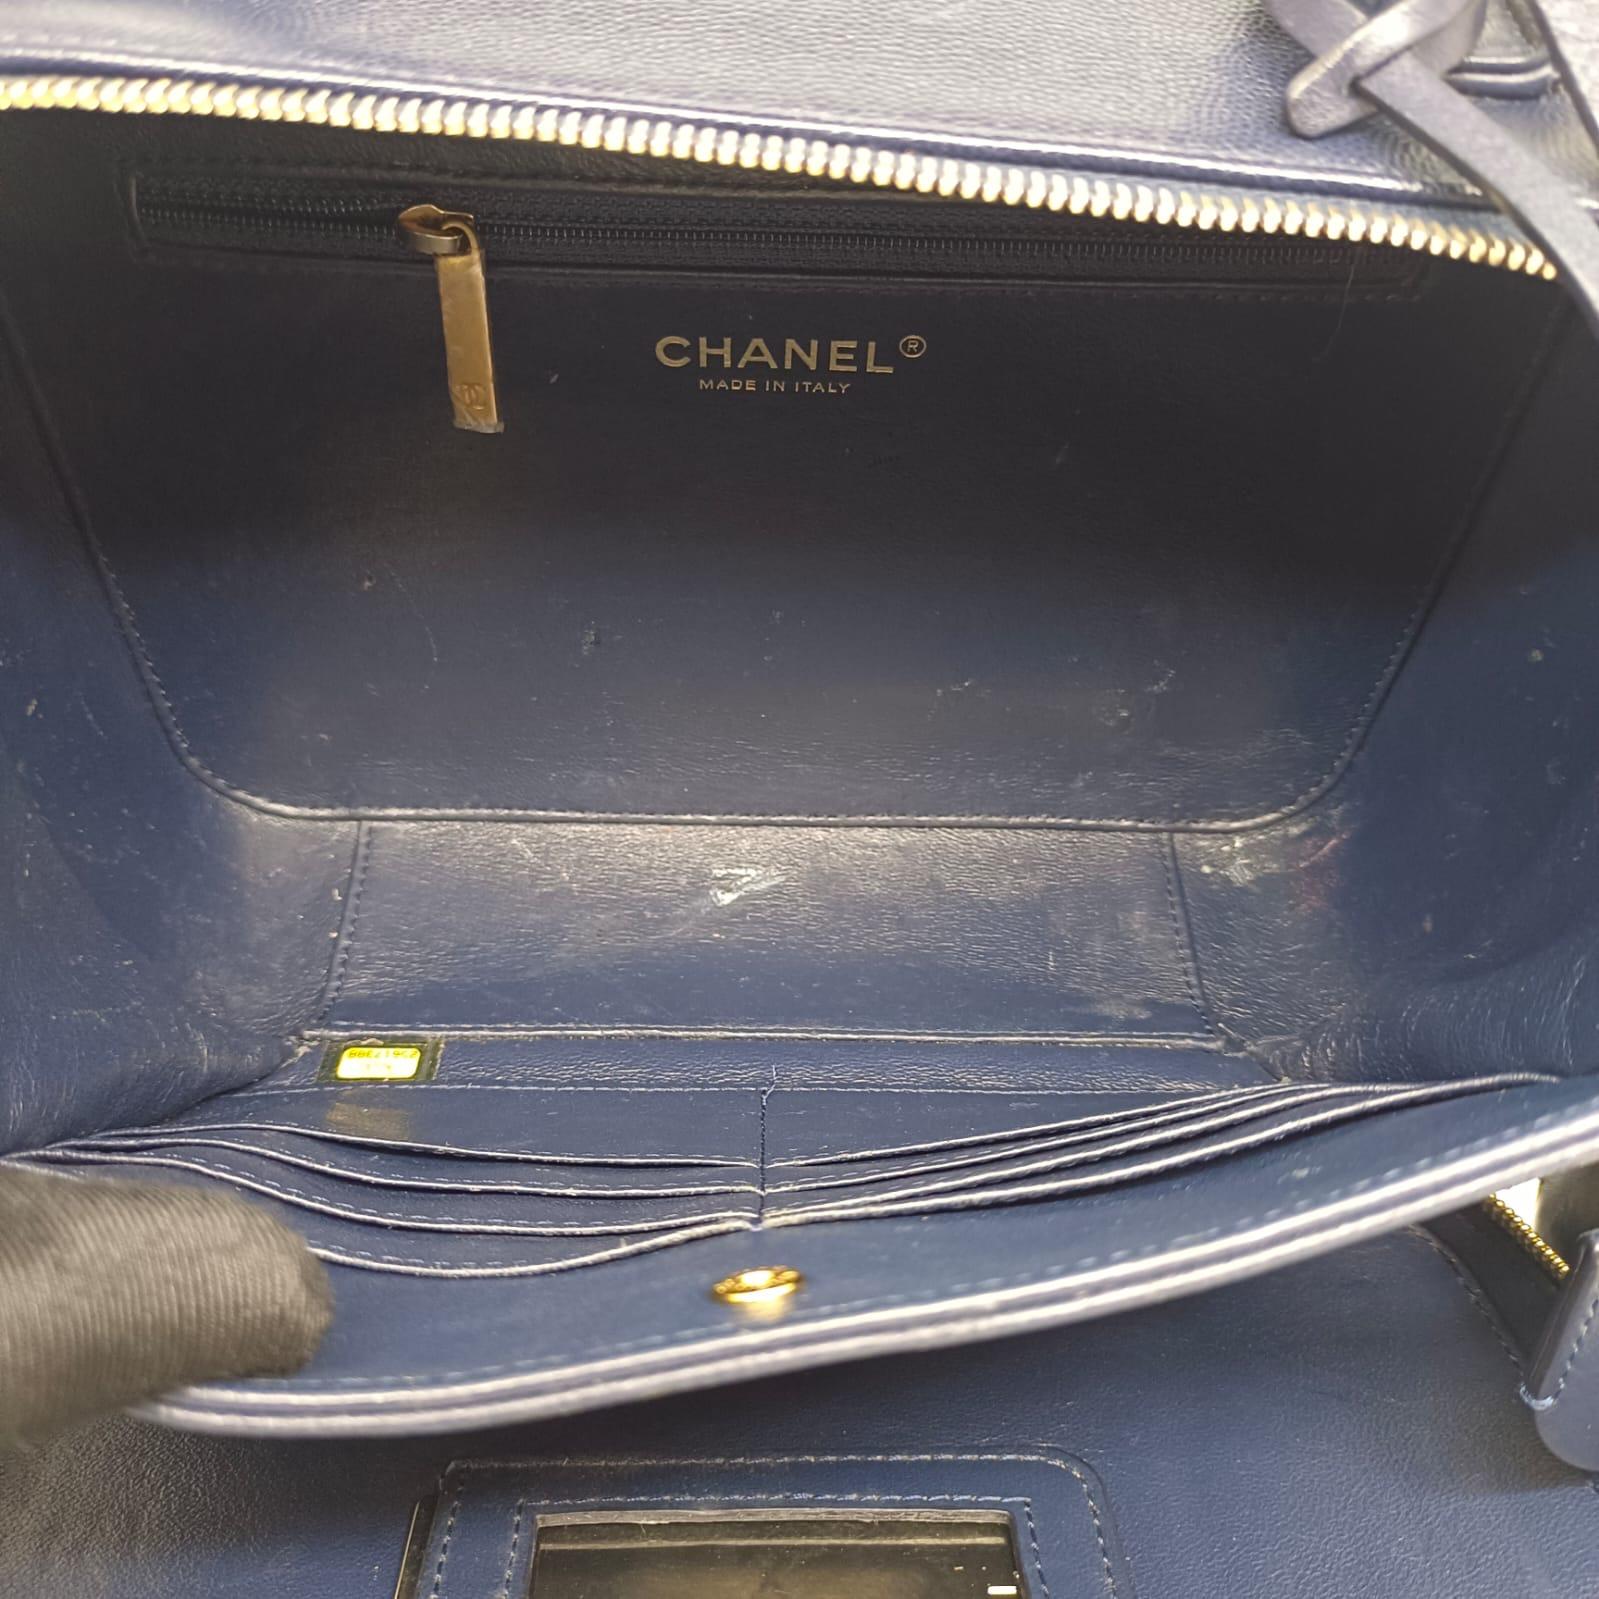 Chanel Navy Caviar Quilted Large Vanity Bag In Good Condition For Sale In Jakarta, Daerah Khusus Ibukota Jakarta